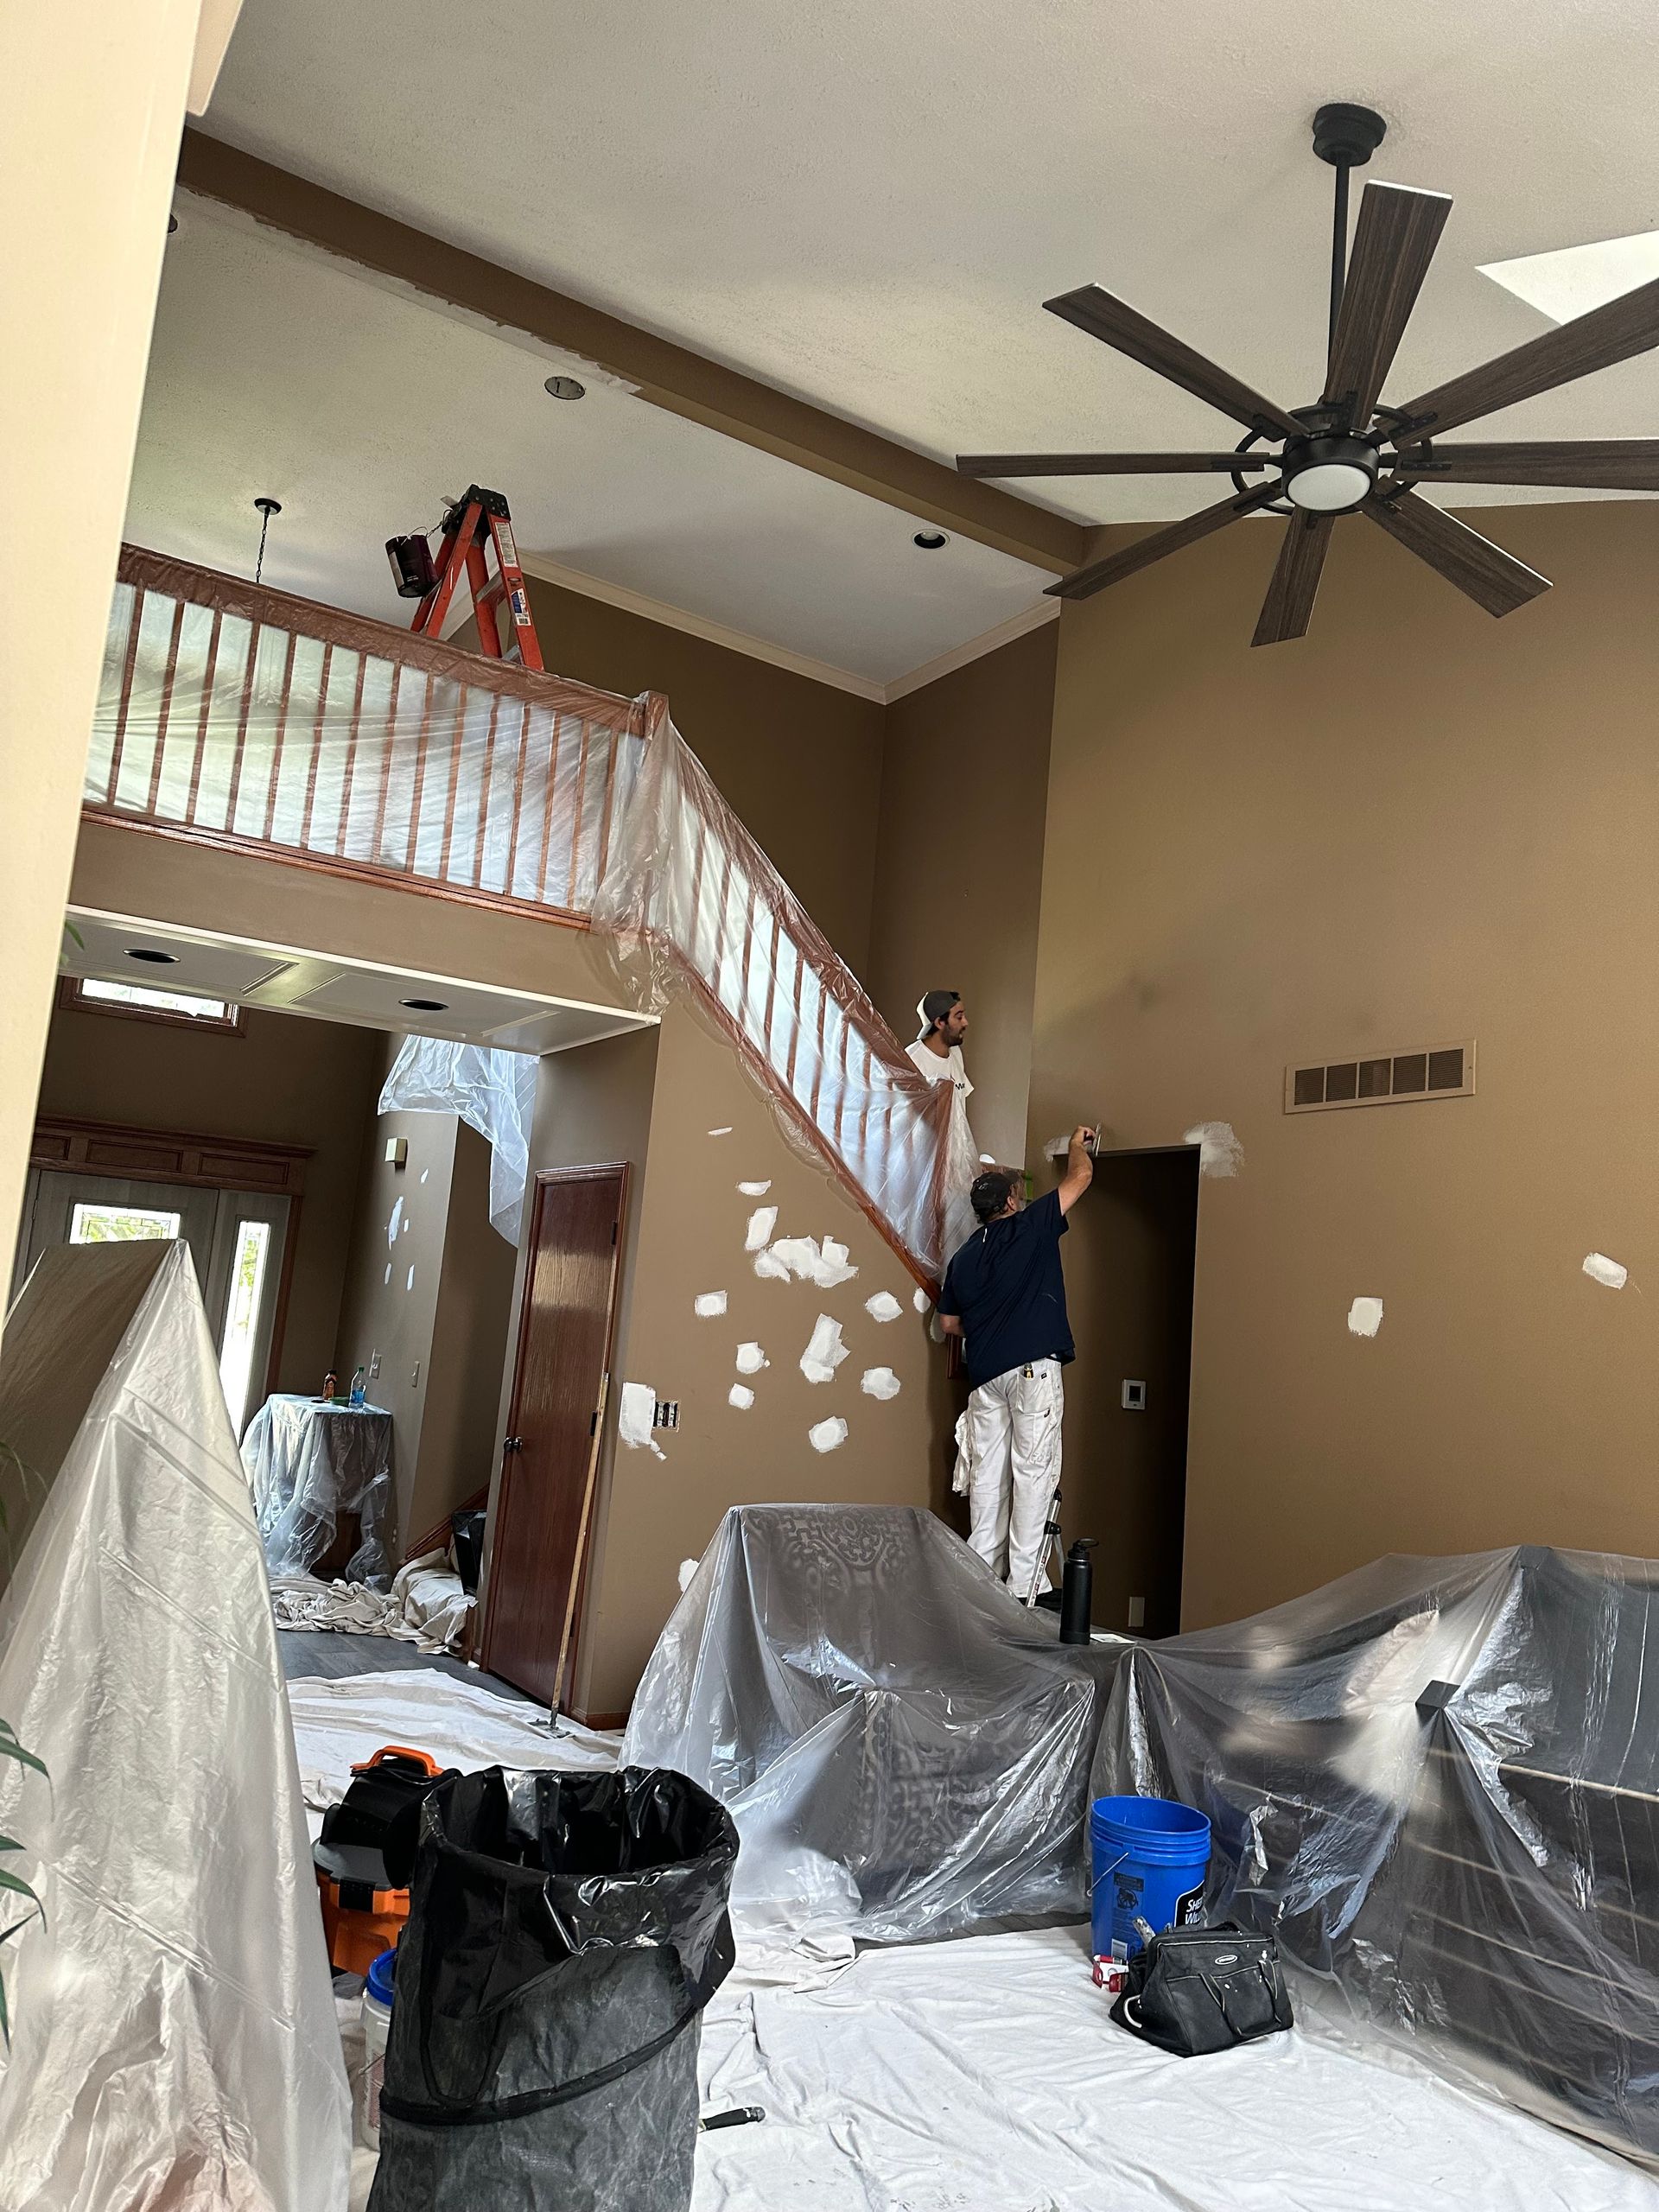 A man is painting a wall in a living room with a ceiling fan.